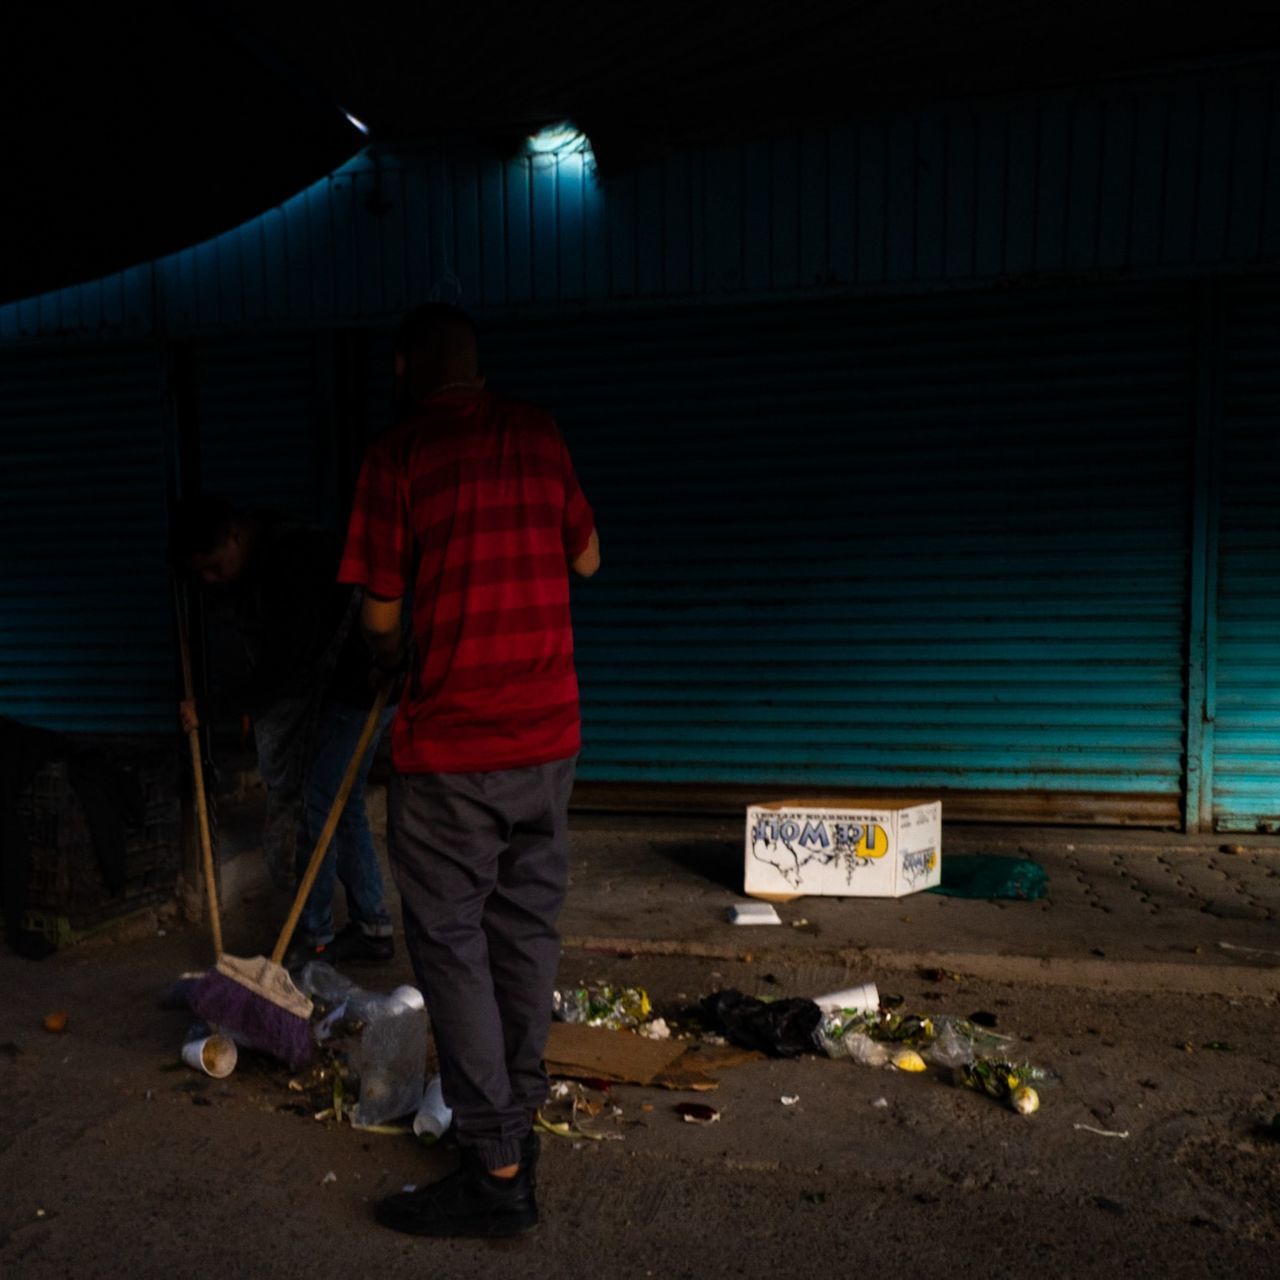 night, one person, light, full length, men, adult, occupation, working, homelessness, city, darkness, poverty, architecture, social issues, broom, street, cleaning